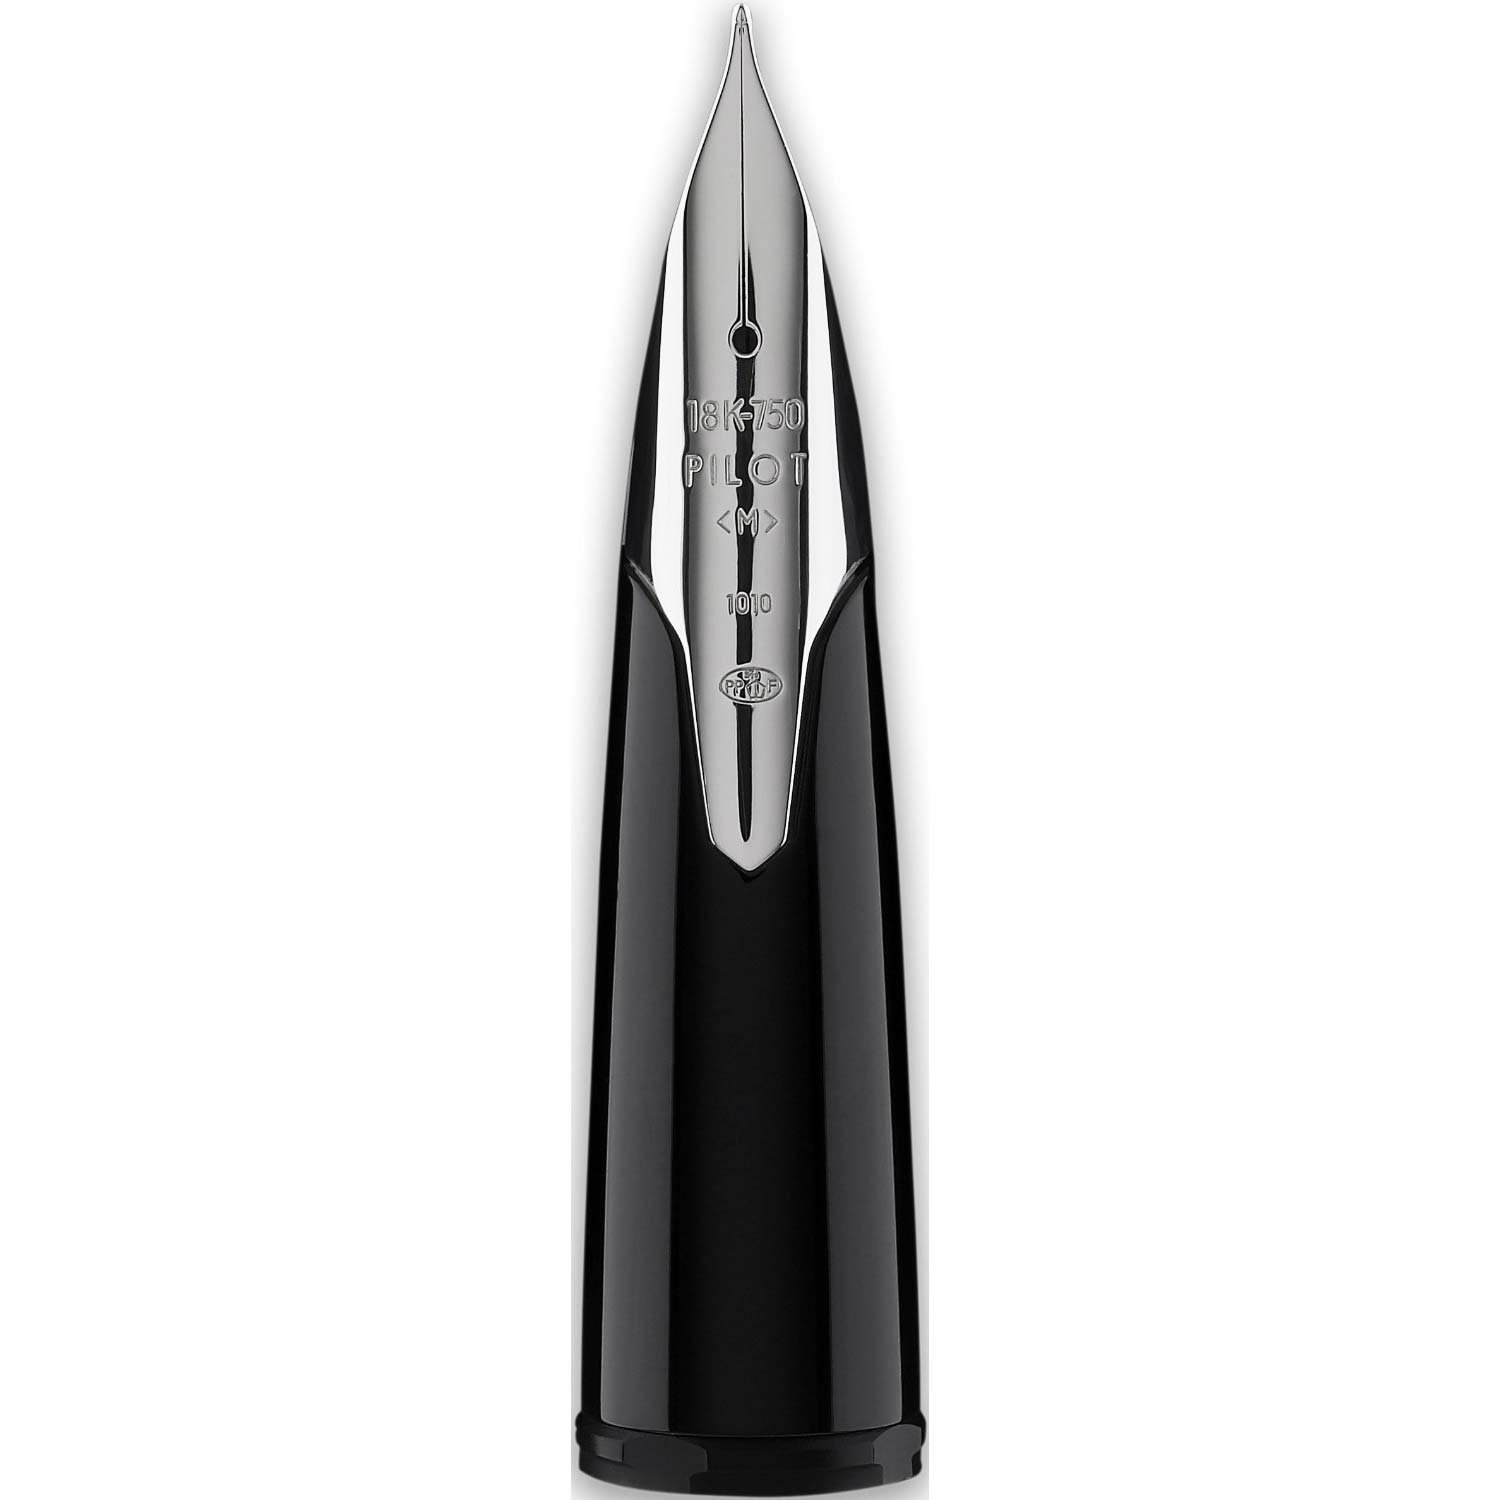 Diamond Point fountain pen in sterling silver with a black onyx cabochon.